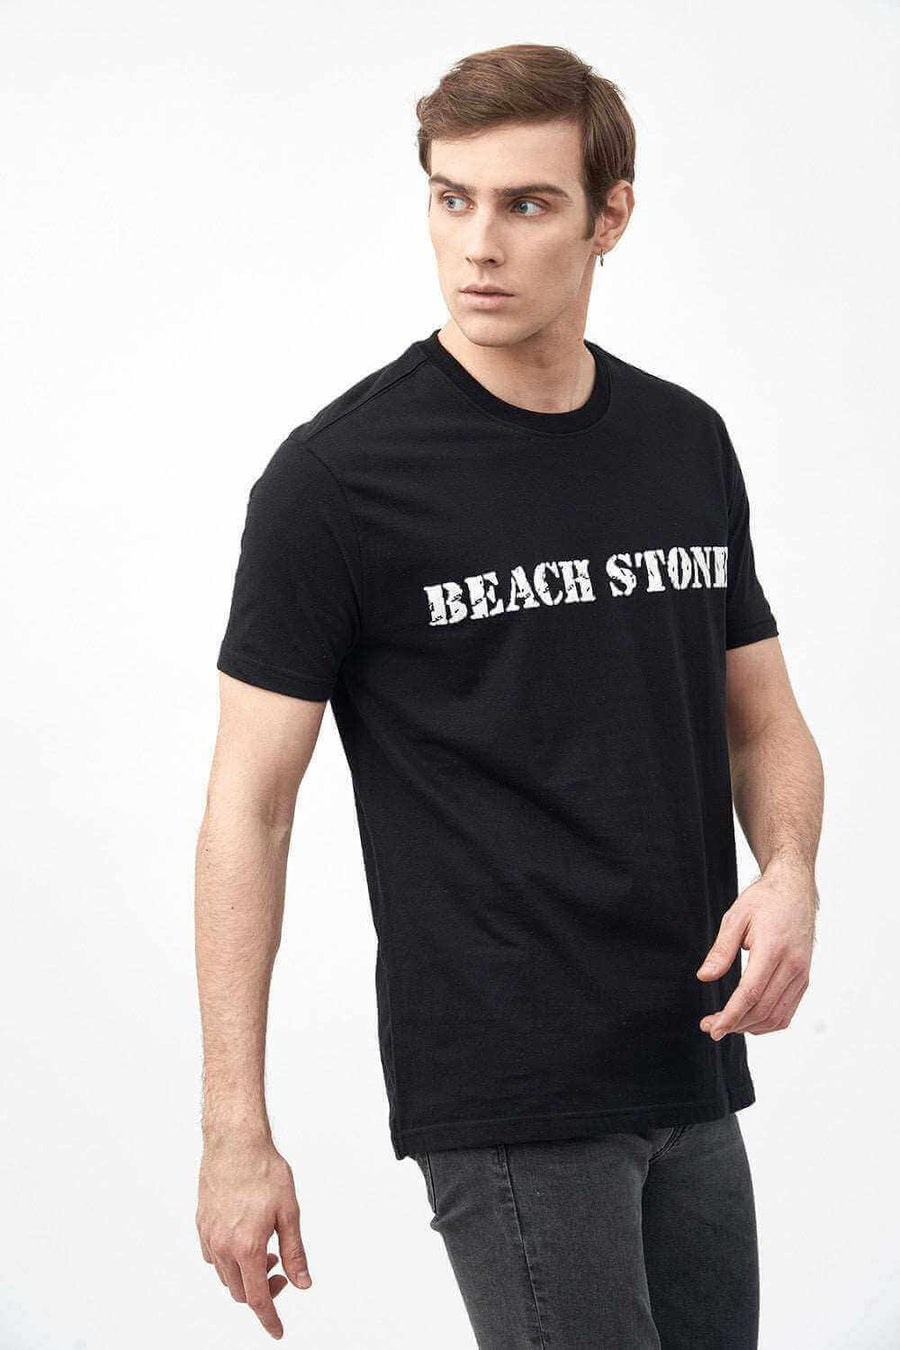 Right Side View of Men's Short Sleeve Shirts in Black